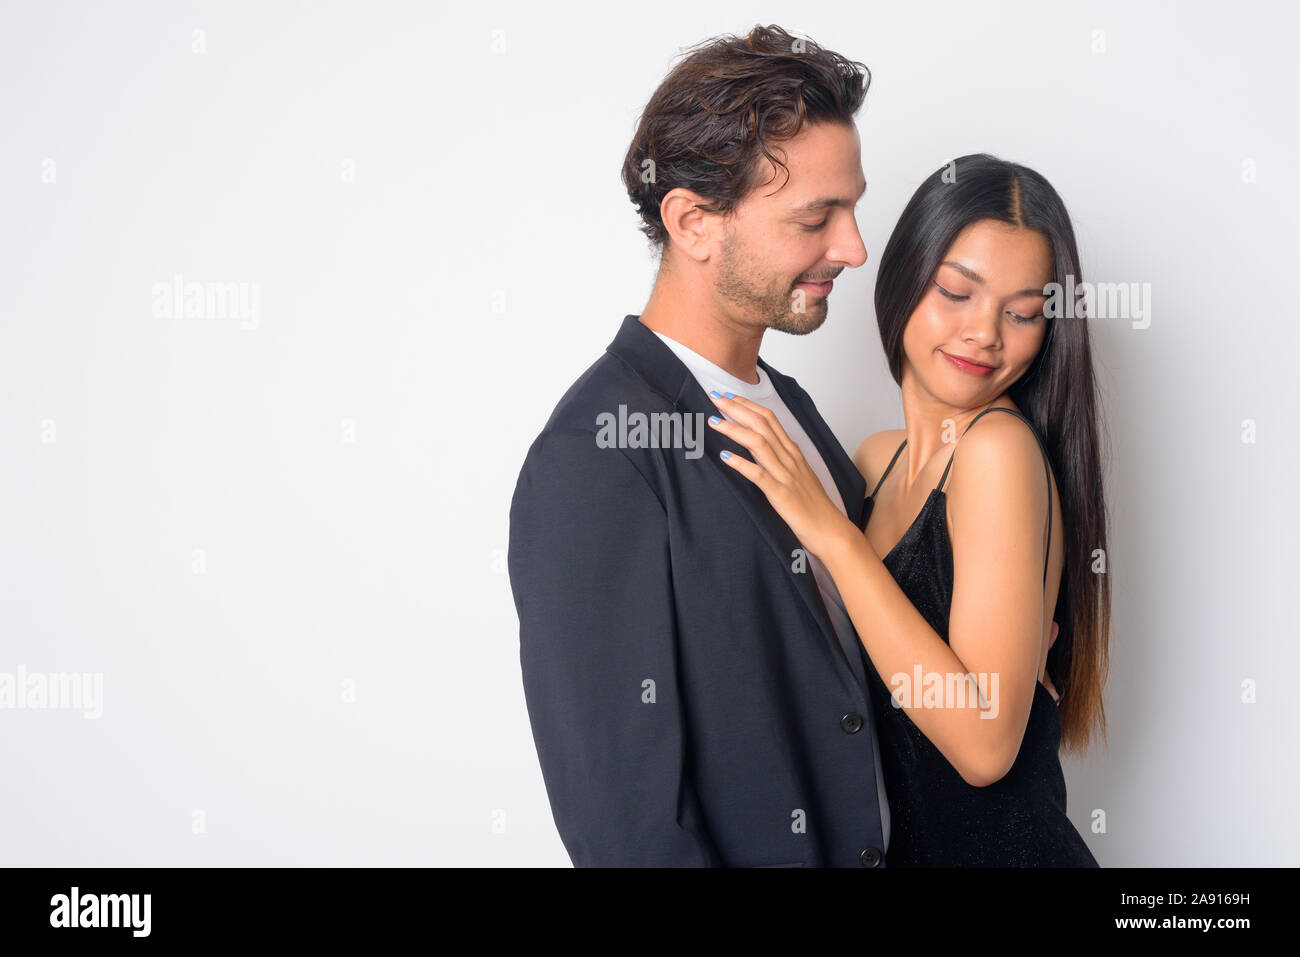 Portrait of multi ethnic business couple hugging each other Stock Photo